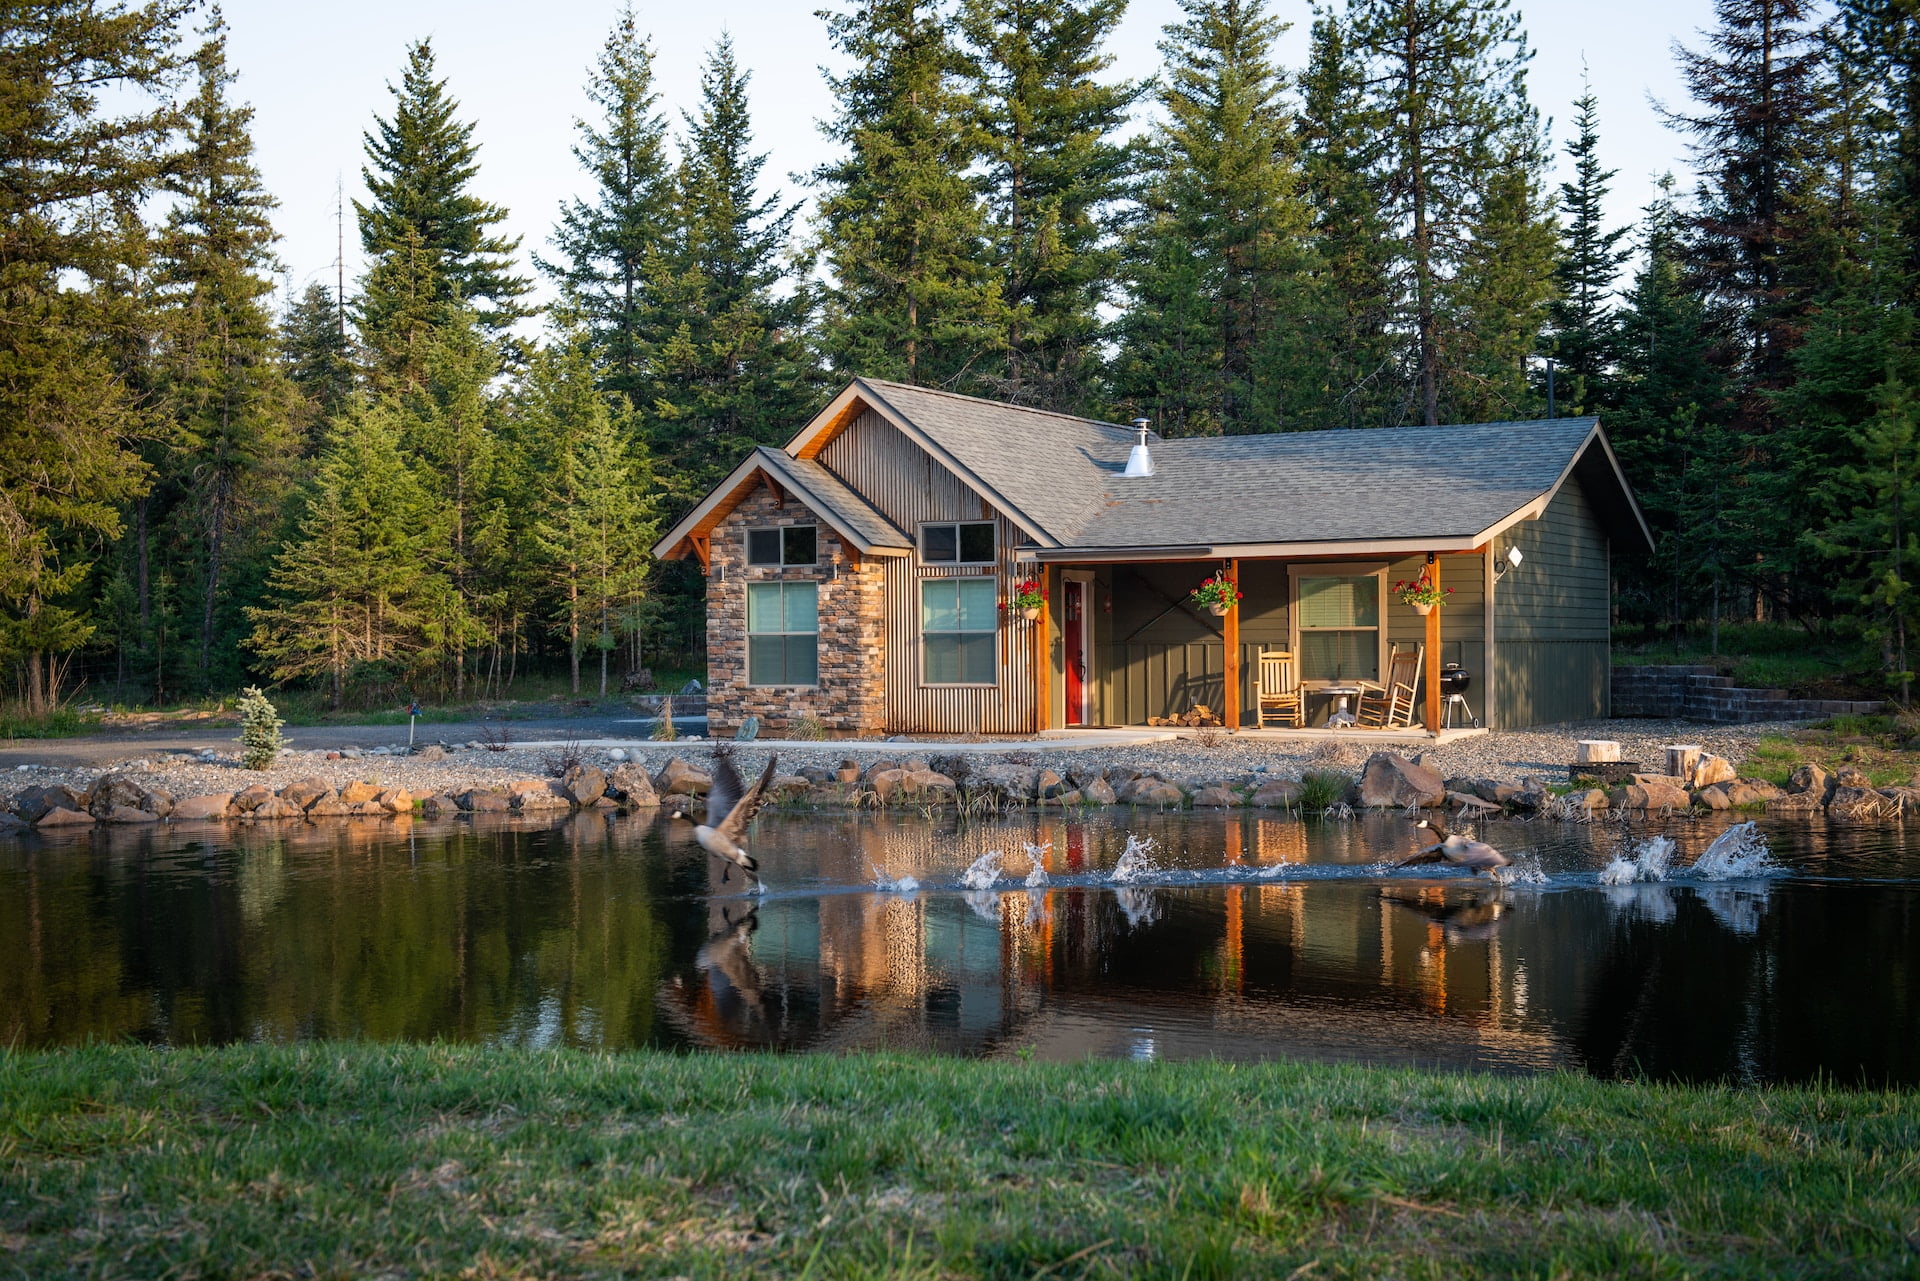 Depicts a large cabin in front of a small pond with geese. Used as a cover image in an overview of Here, the platform for fractional investments in vacation rental homes.